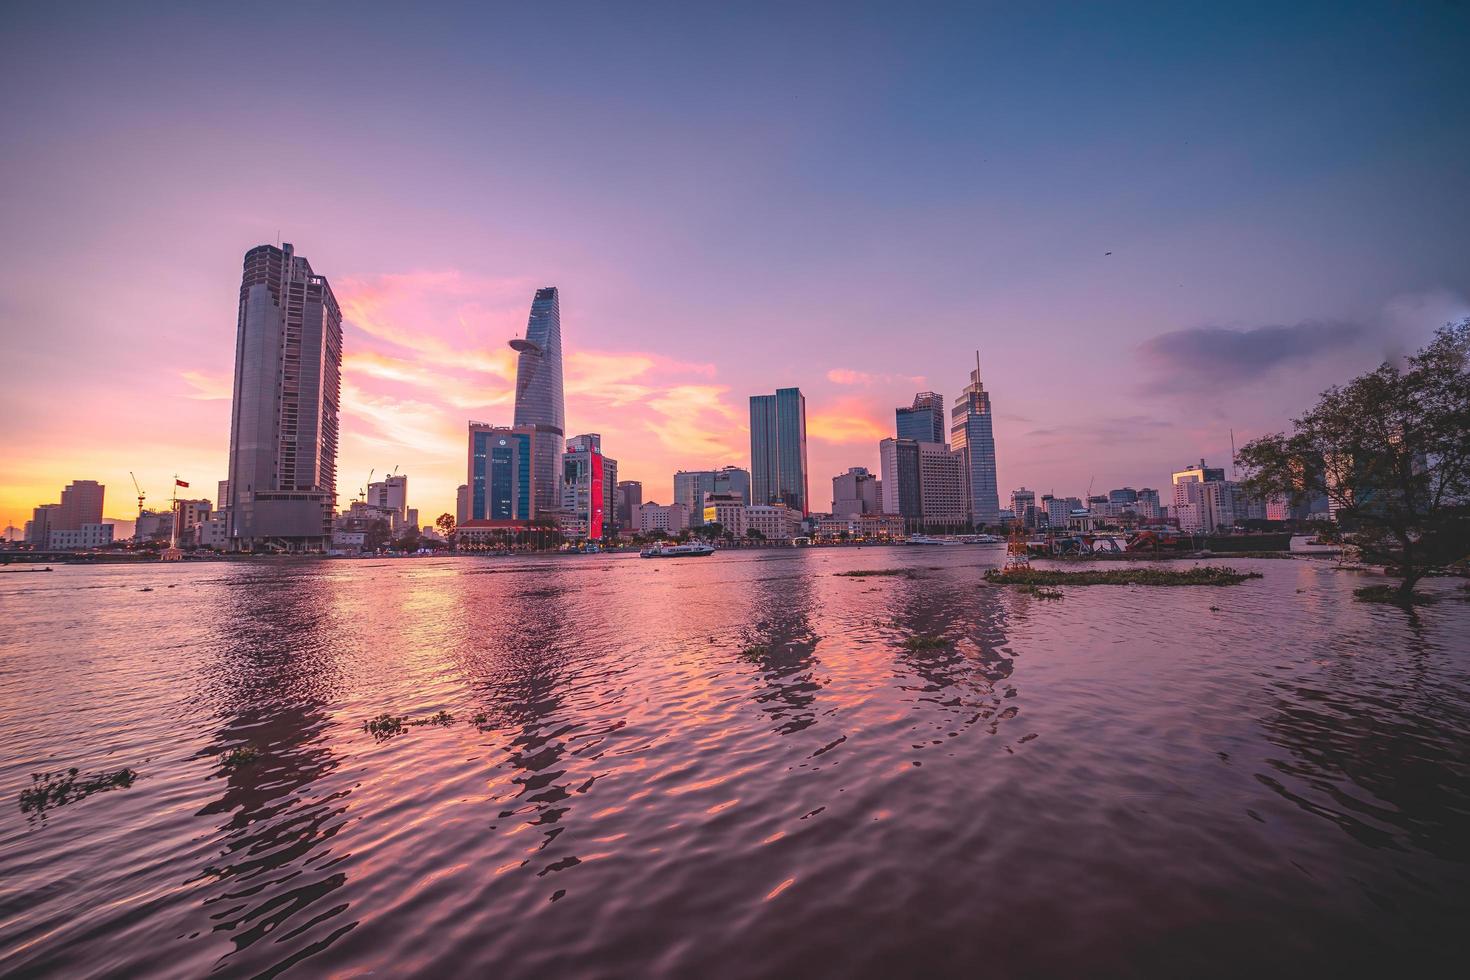 HO CHI MINH, VIETNAM - FEB 13 2022  View of Bitexco Financial Tower building, buildings, roads, Thu Thiem bridge and Saigon river in Ho Chi Minh city in sunset. High quality panorama image. photo